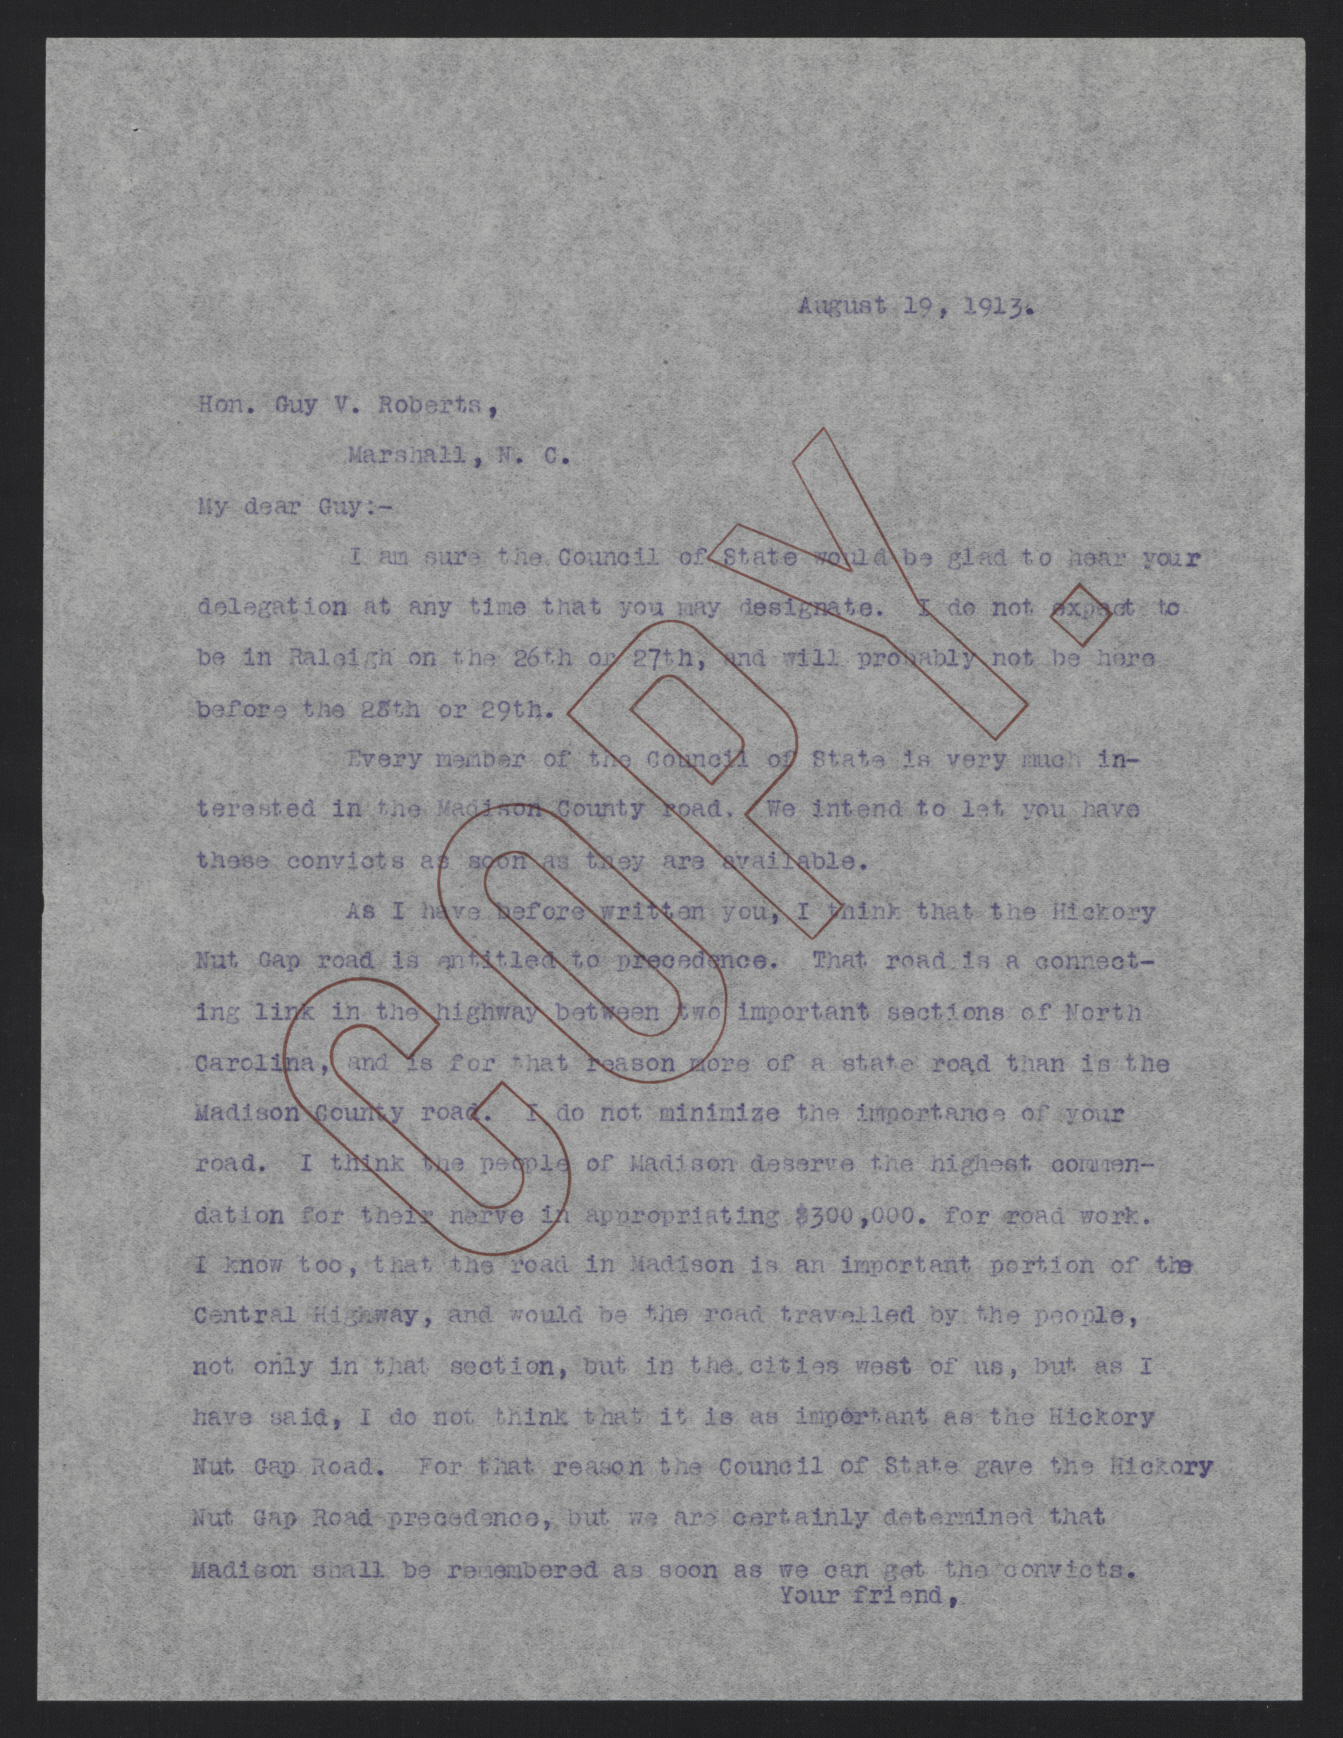 Letter from Craig to Roberts, August 19, 1913